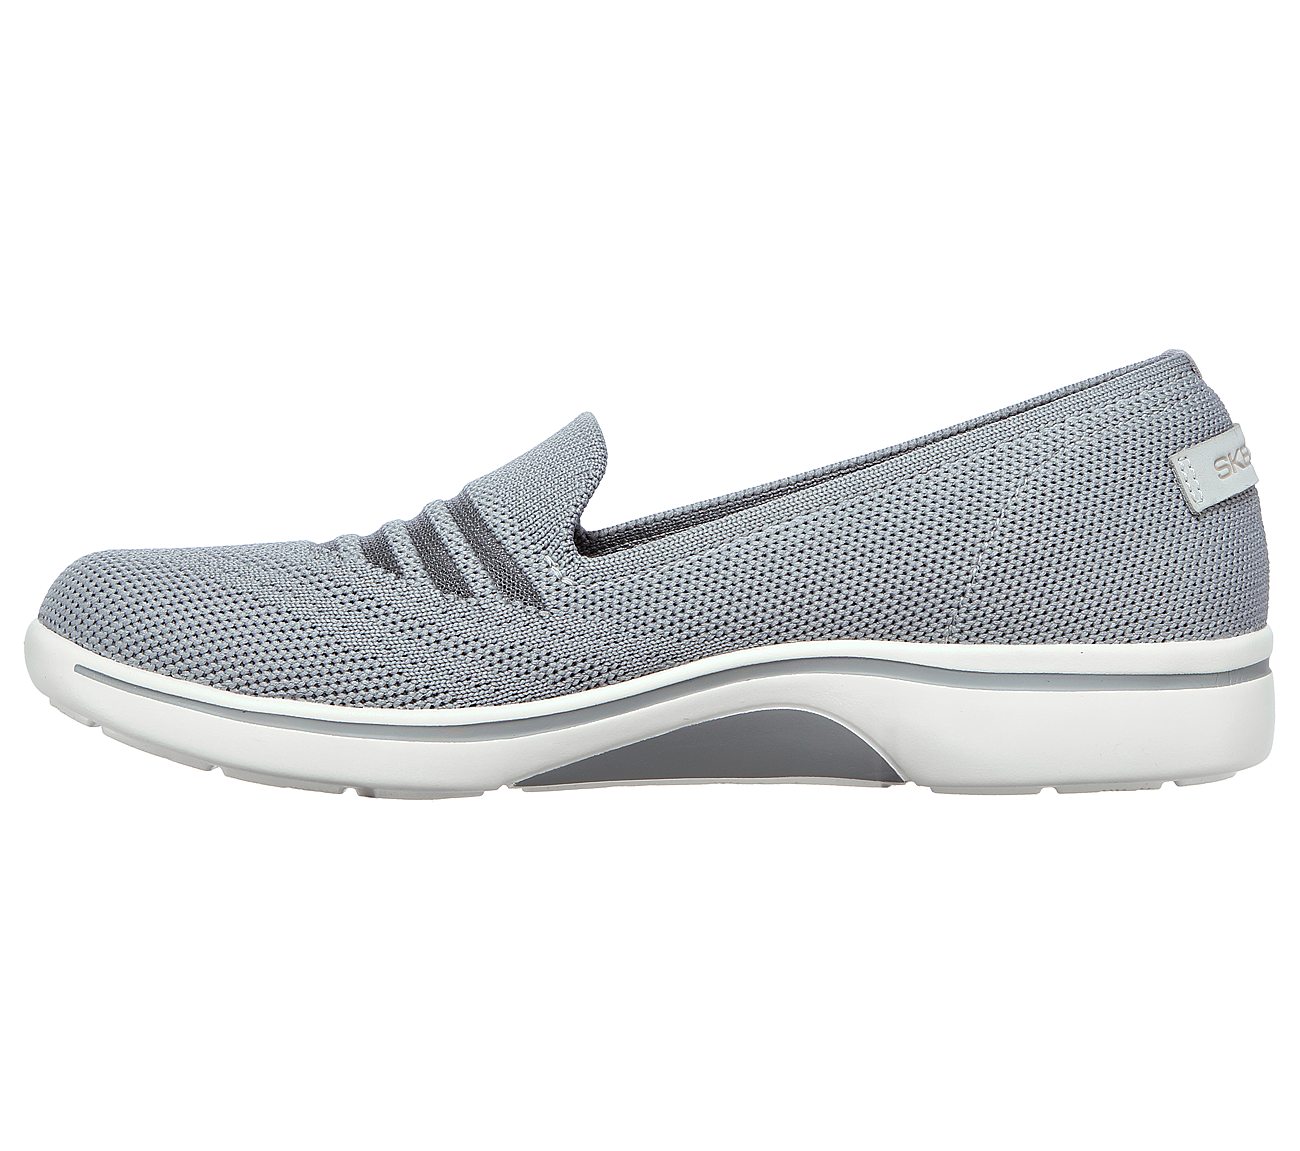 ARCH FIT UPLIFT-CUTTING EDGE, GREY Footwear Left View